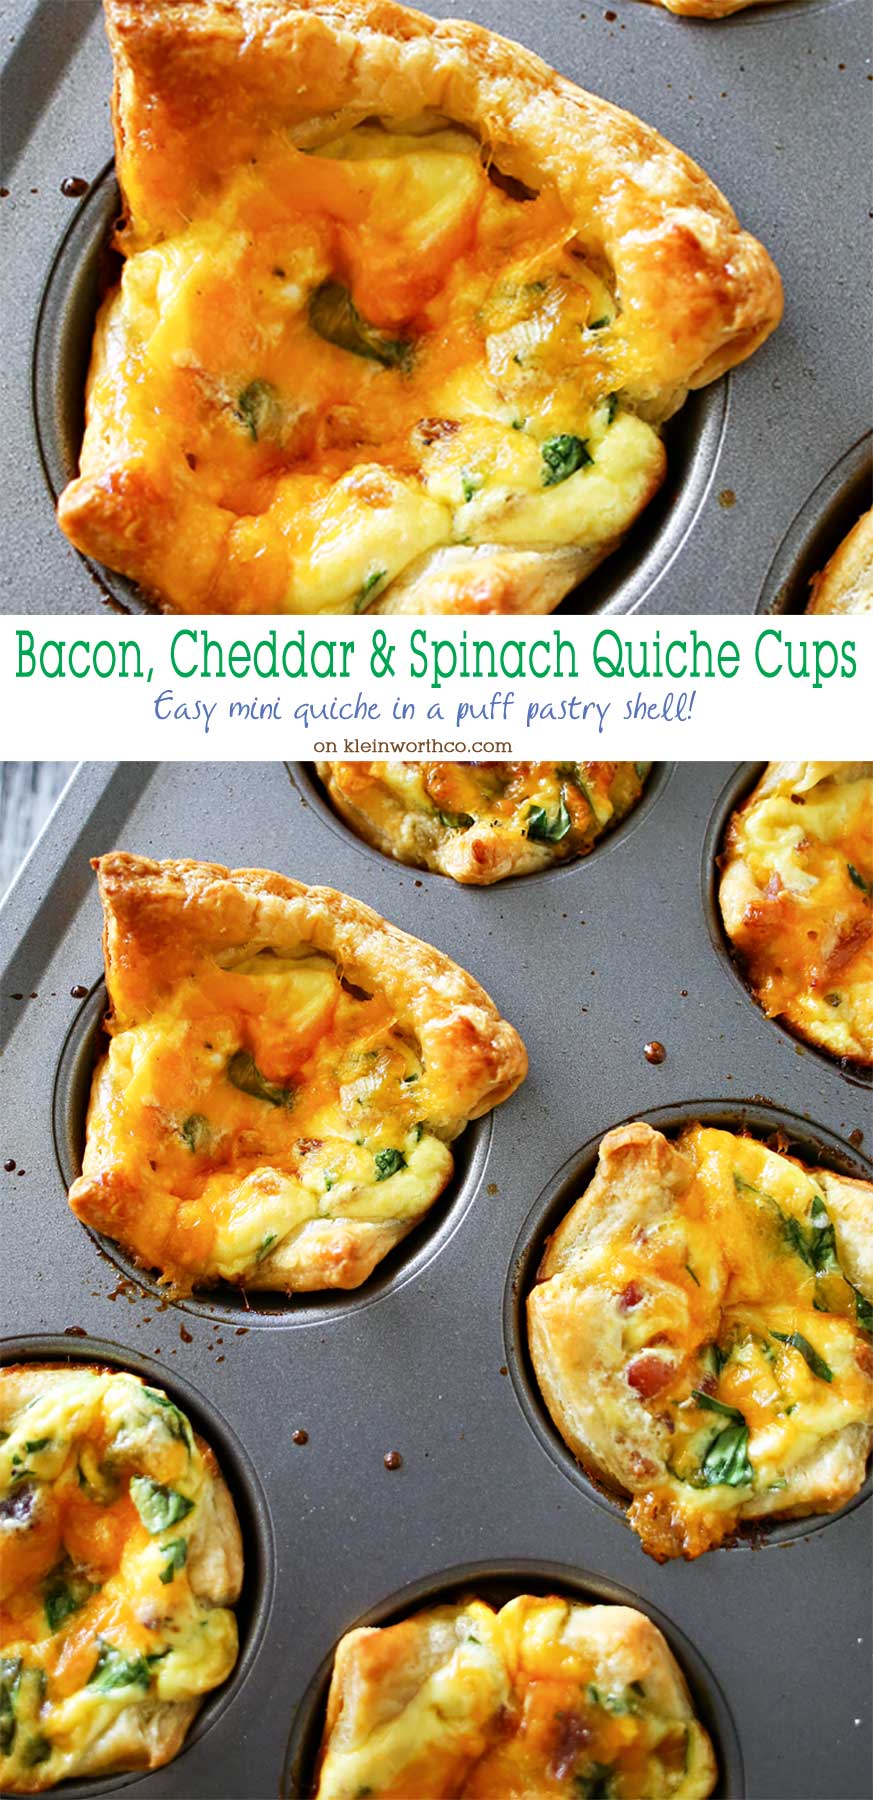 Bacon Cheddar & Spinach Quiche Cups are a perfect, savory brunch recipe that's so easy to make. Baked in fluffy puff pastry- these mini quiches are delish! Perfect for Easter or Mother's Day celebrations, you'll want to make 3-4 batches to feed your crowd. But don't worry, they are so simple & take less than 30 minutes.